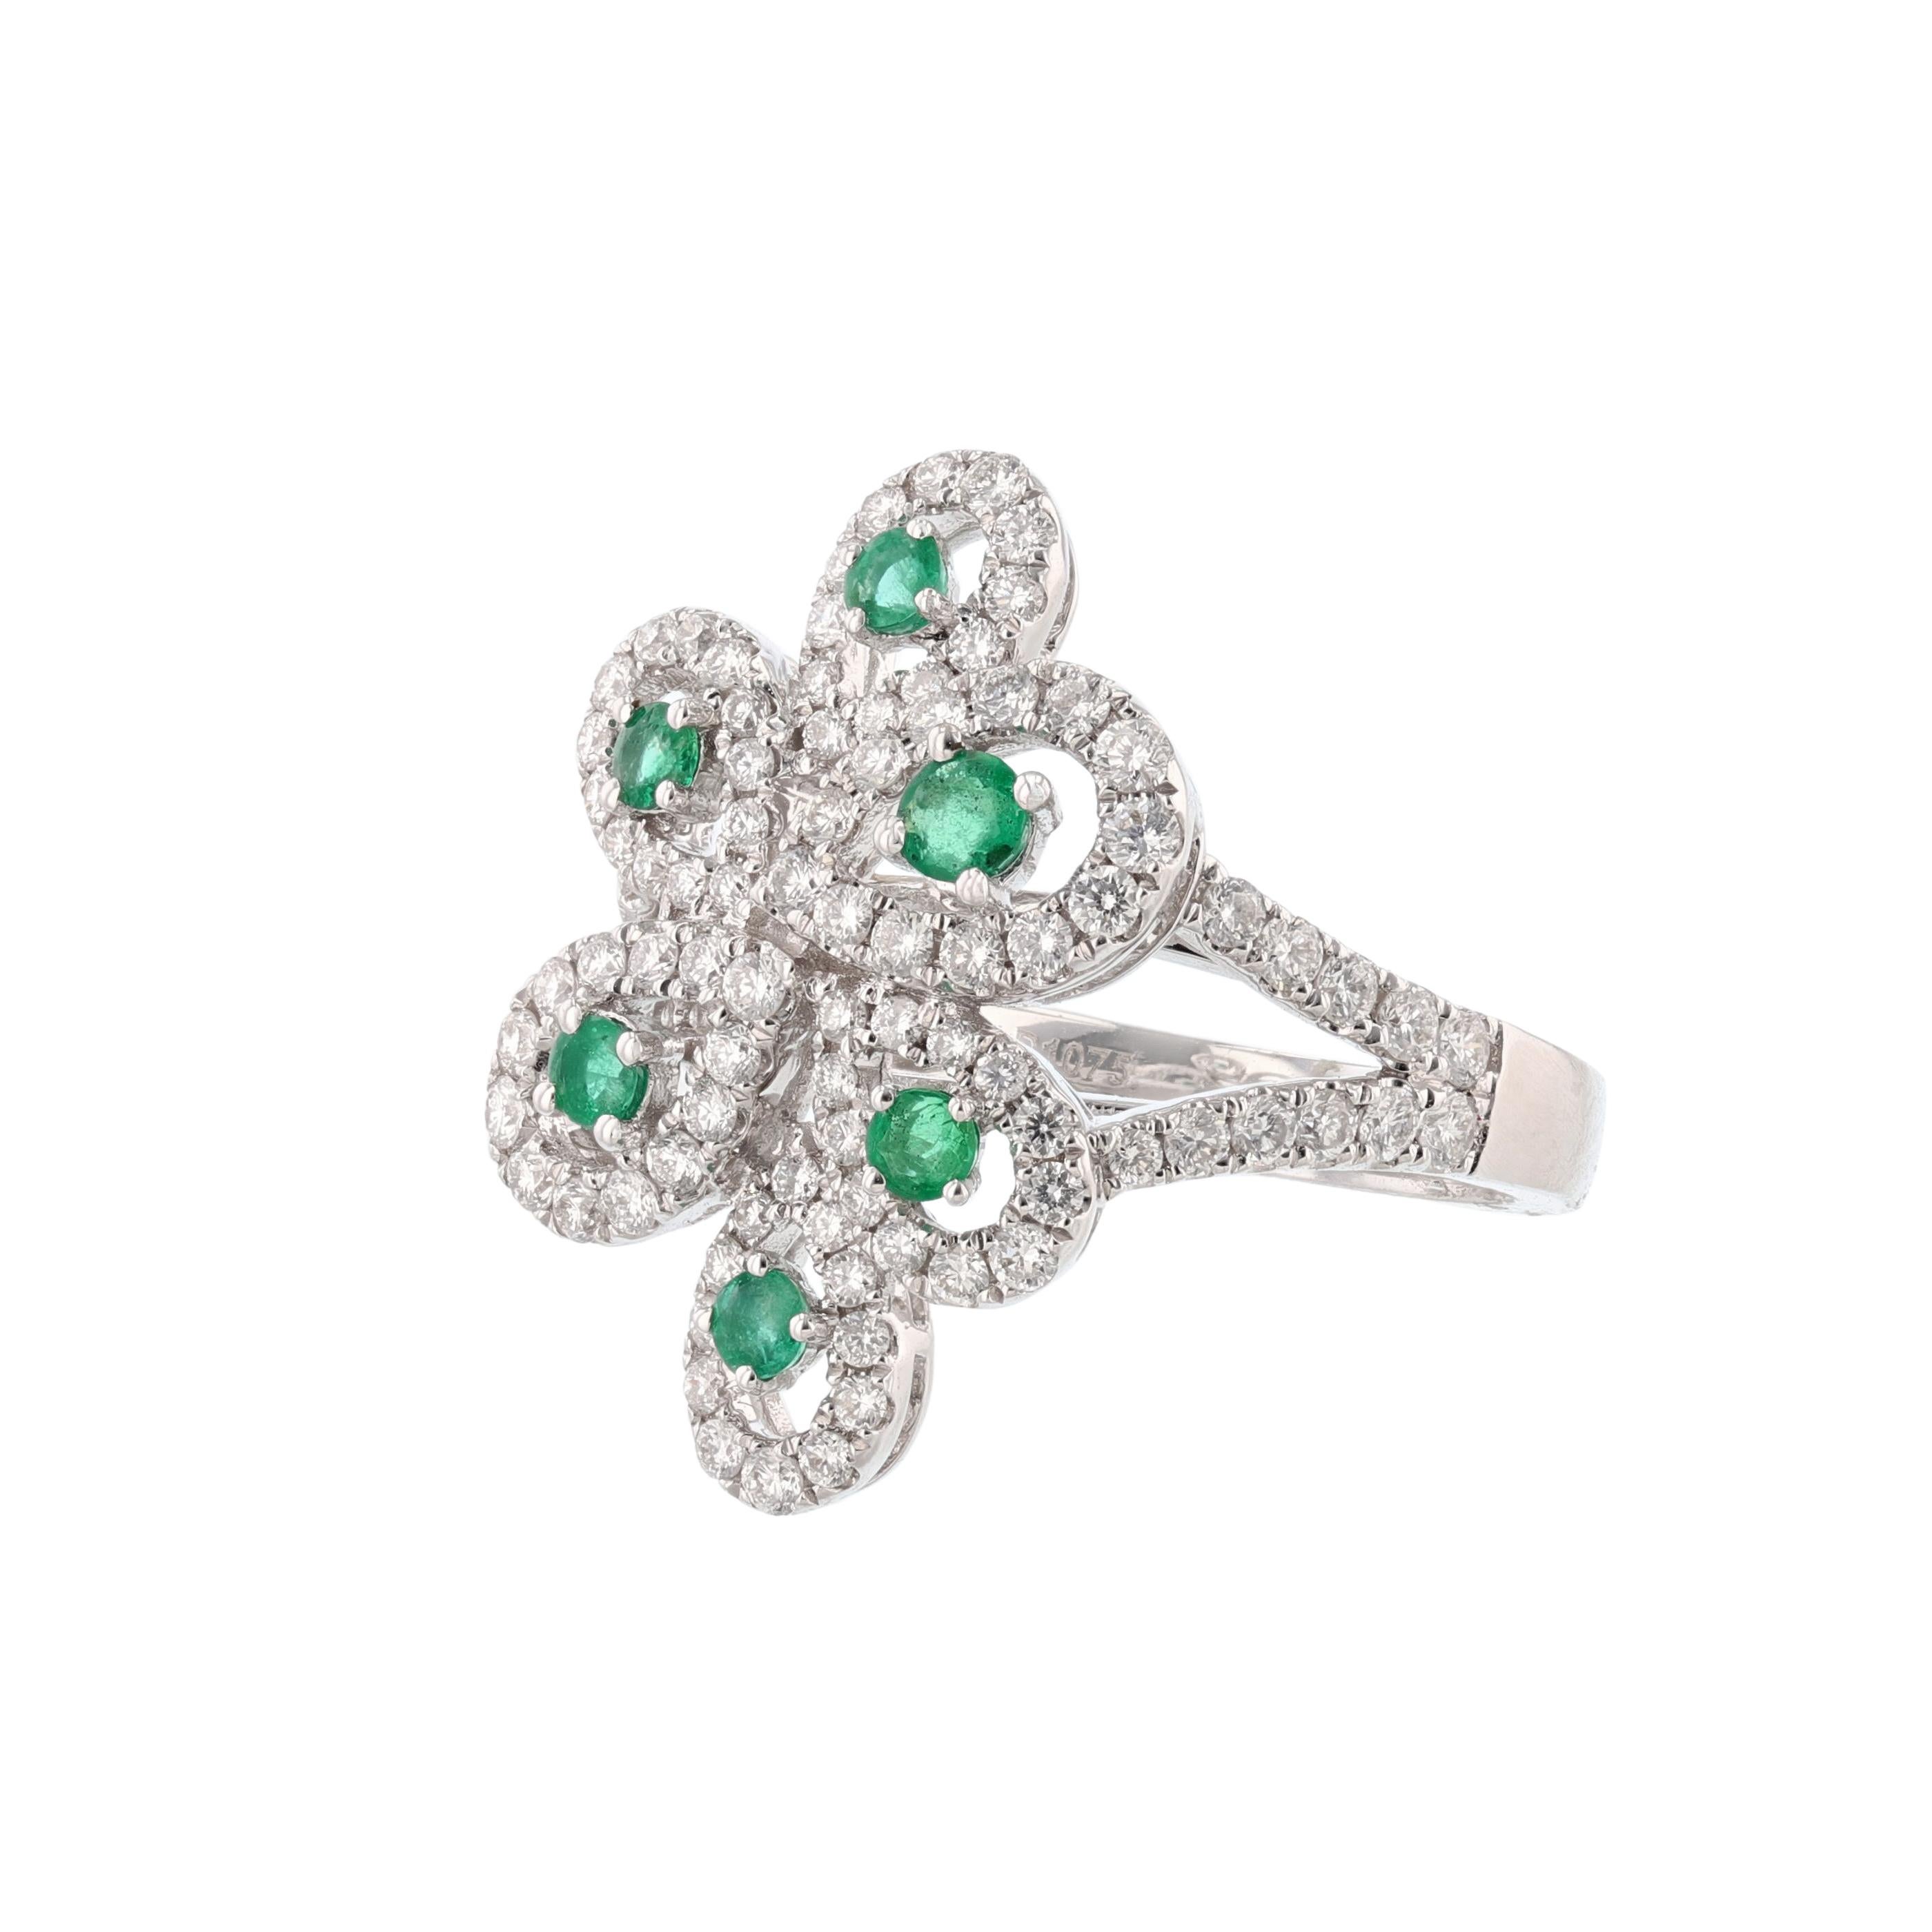 This ring is made in 18K white gold and features 6 round cut emeralds weighing 0.41 carat. Also, the ring features 96 round cut diamonds weighing 1.07 carat. With a color grade (H) and clarity grade (SI1). All stones are prong set. 